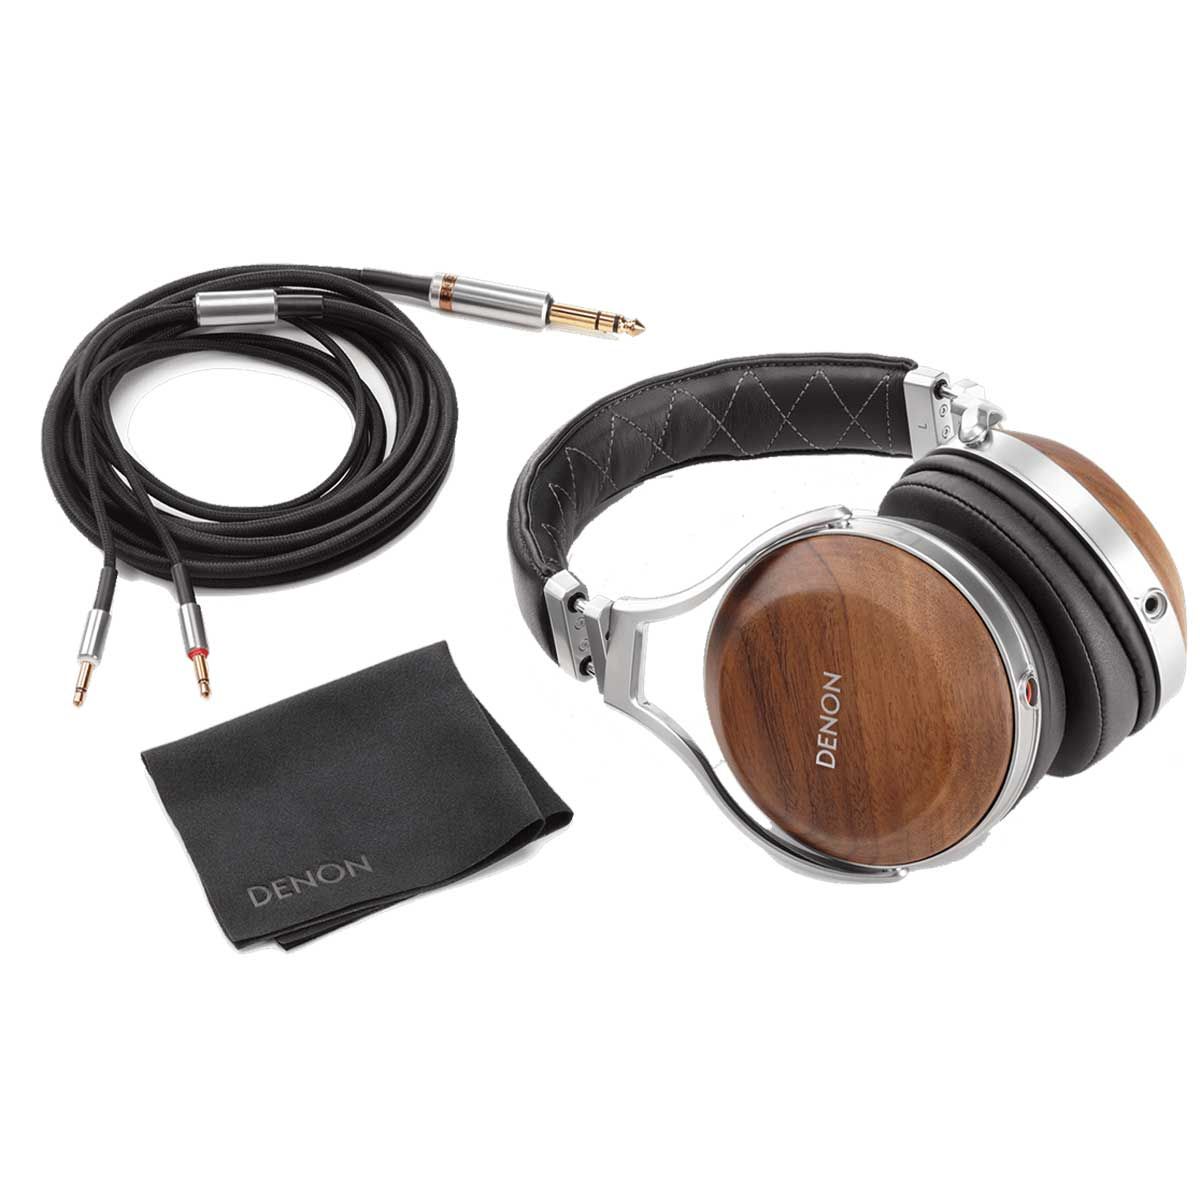 Wide-angle view of all accessories that come with the Denon AH-D7200 Closed-back headphone.
